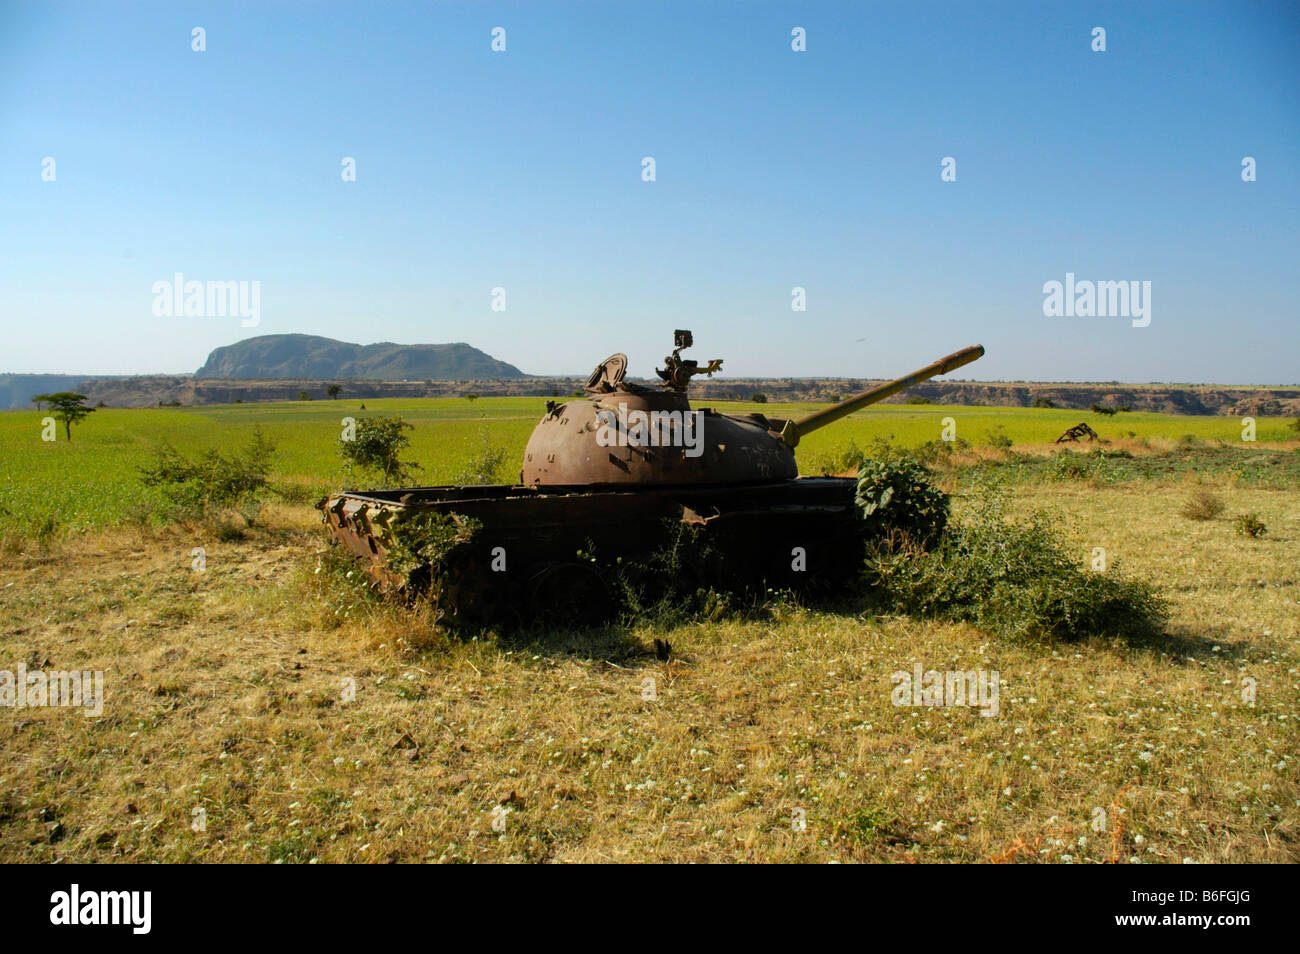 War, rusted old Russian tank lying in a field near Aksum, Ethiopia, Africa Stock Photo